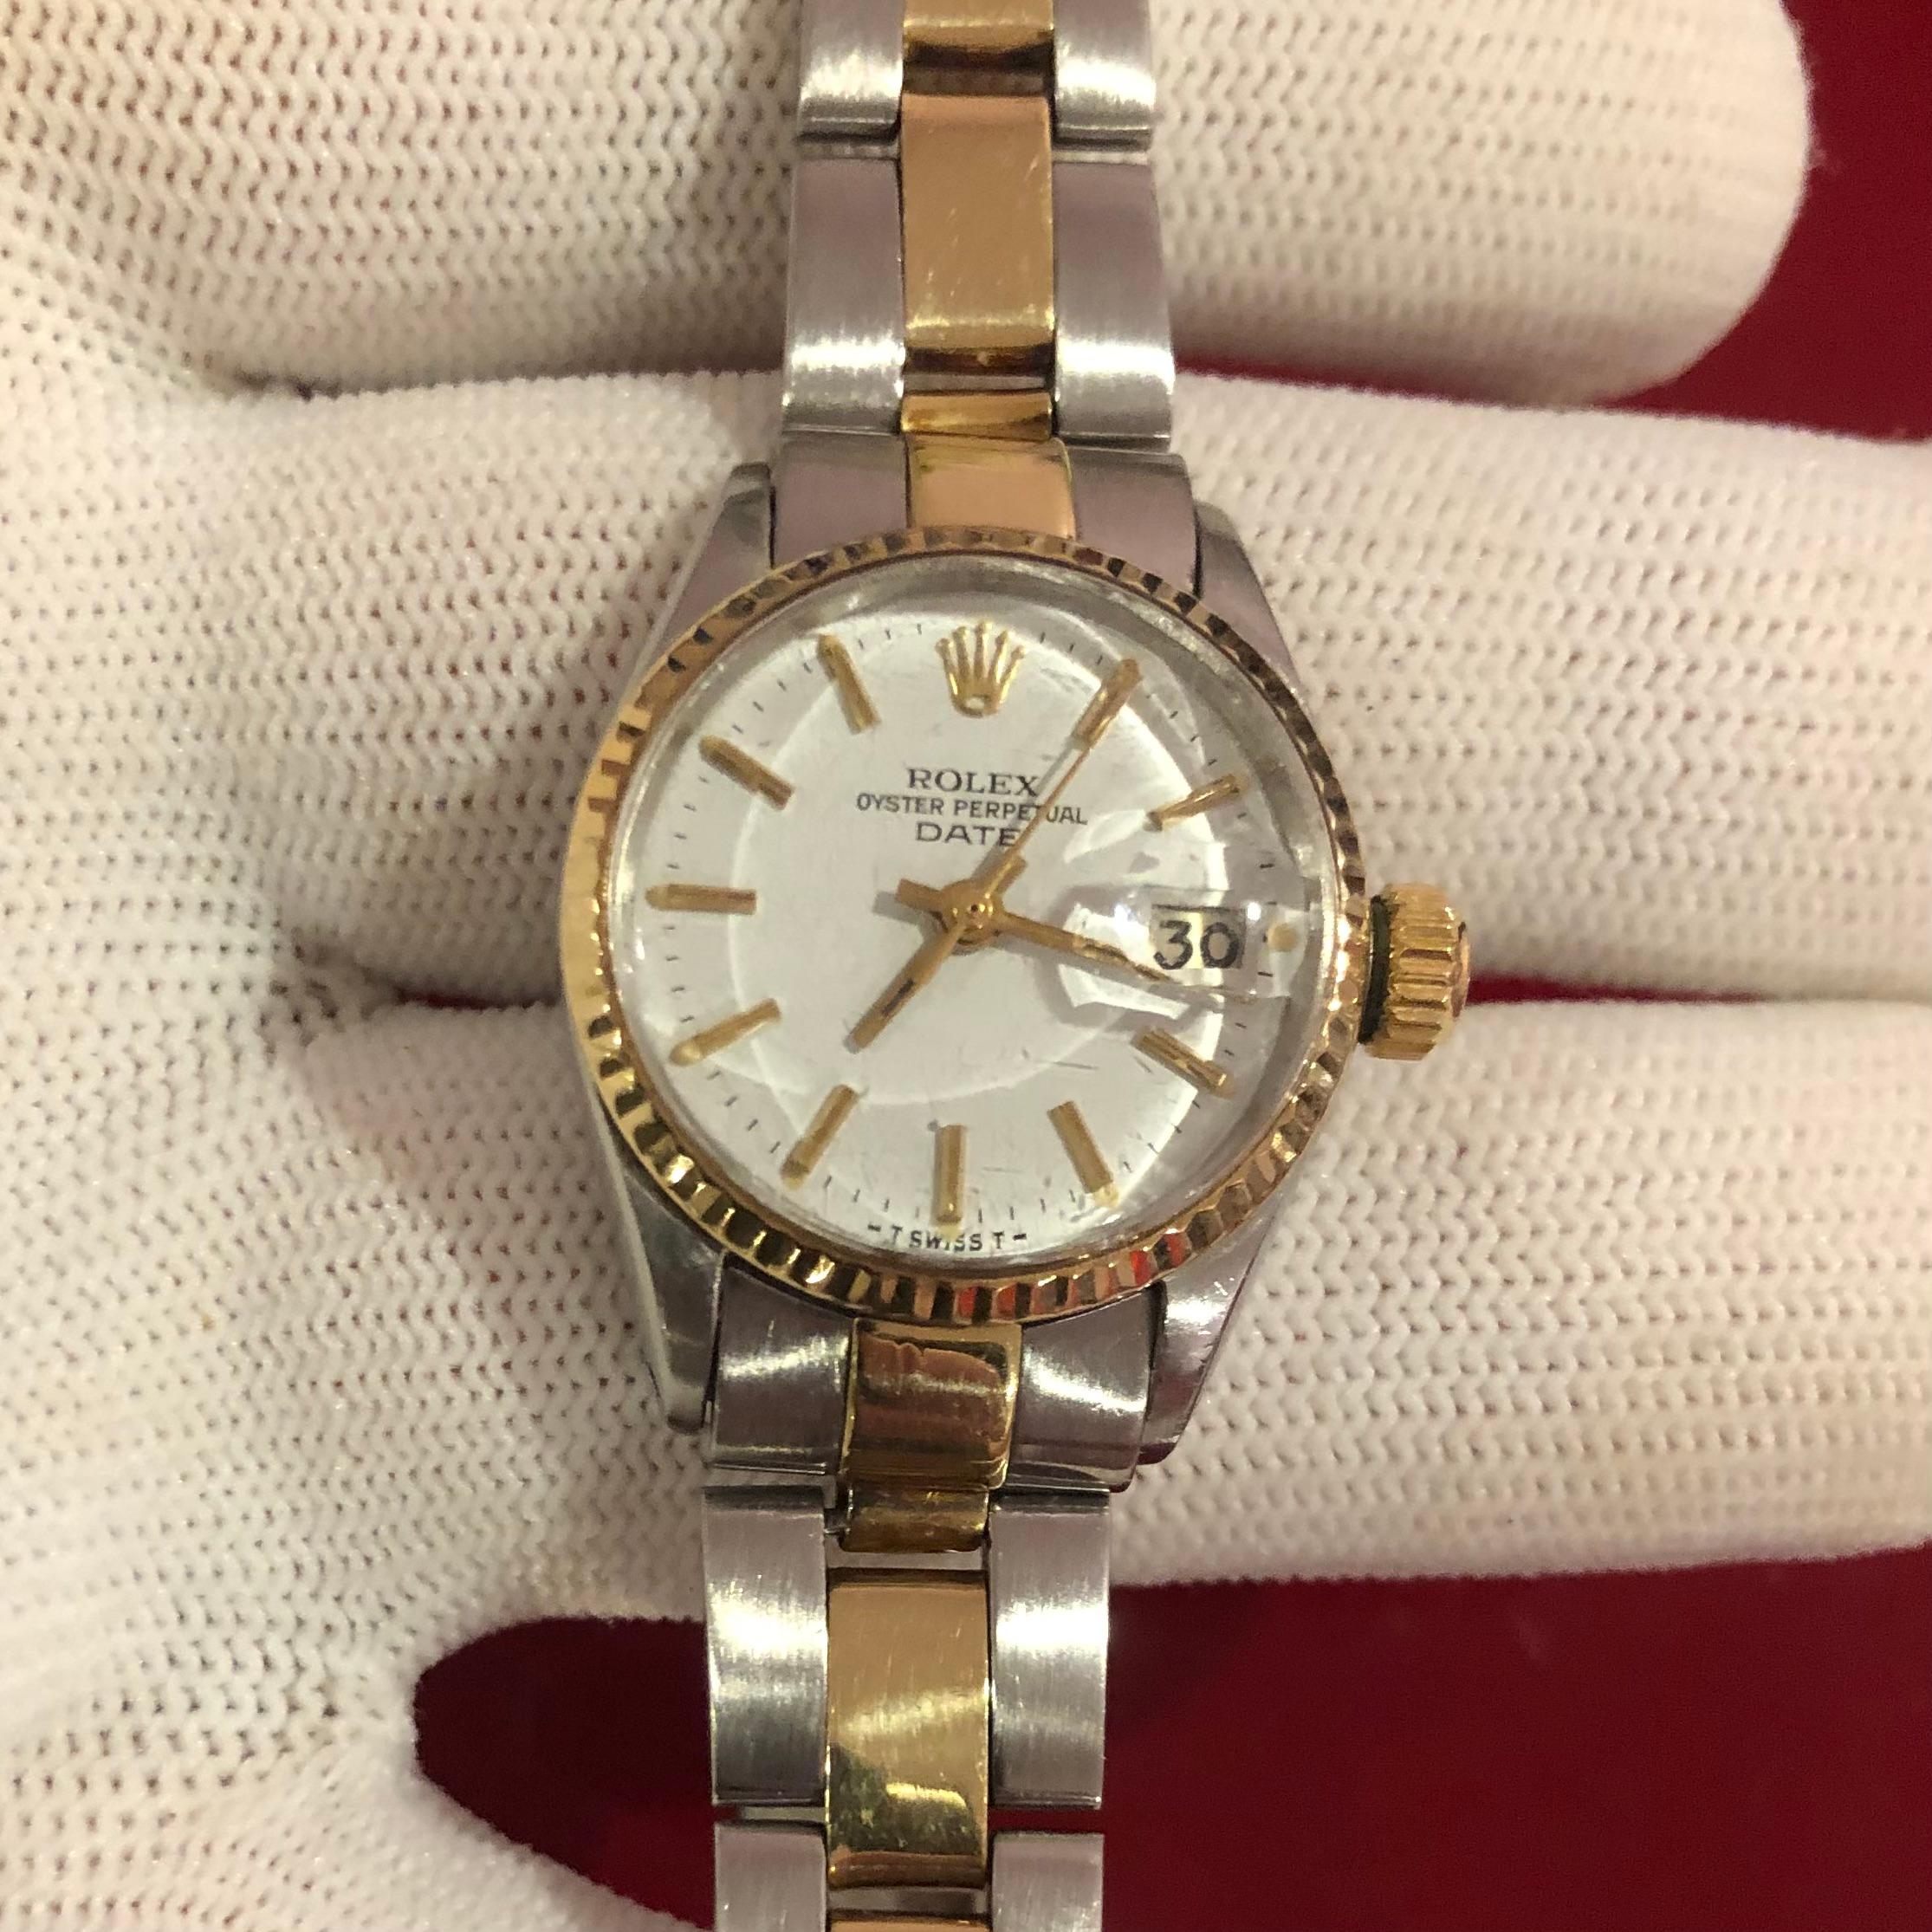 Rolex Oyster Perpetual 6517 two tone 14k Lady Date 26mm white dial ladies watch. The Rolex movement is running and an official self-winding Rolex automatic movement. 

This original genuine Rolex timepiece features a 14k yellow gold fluted bezel and